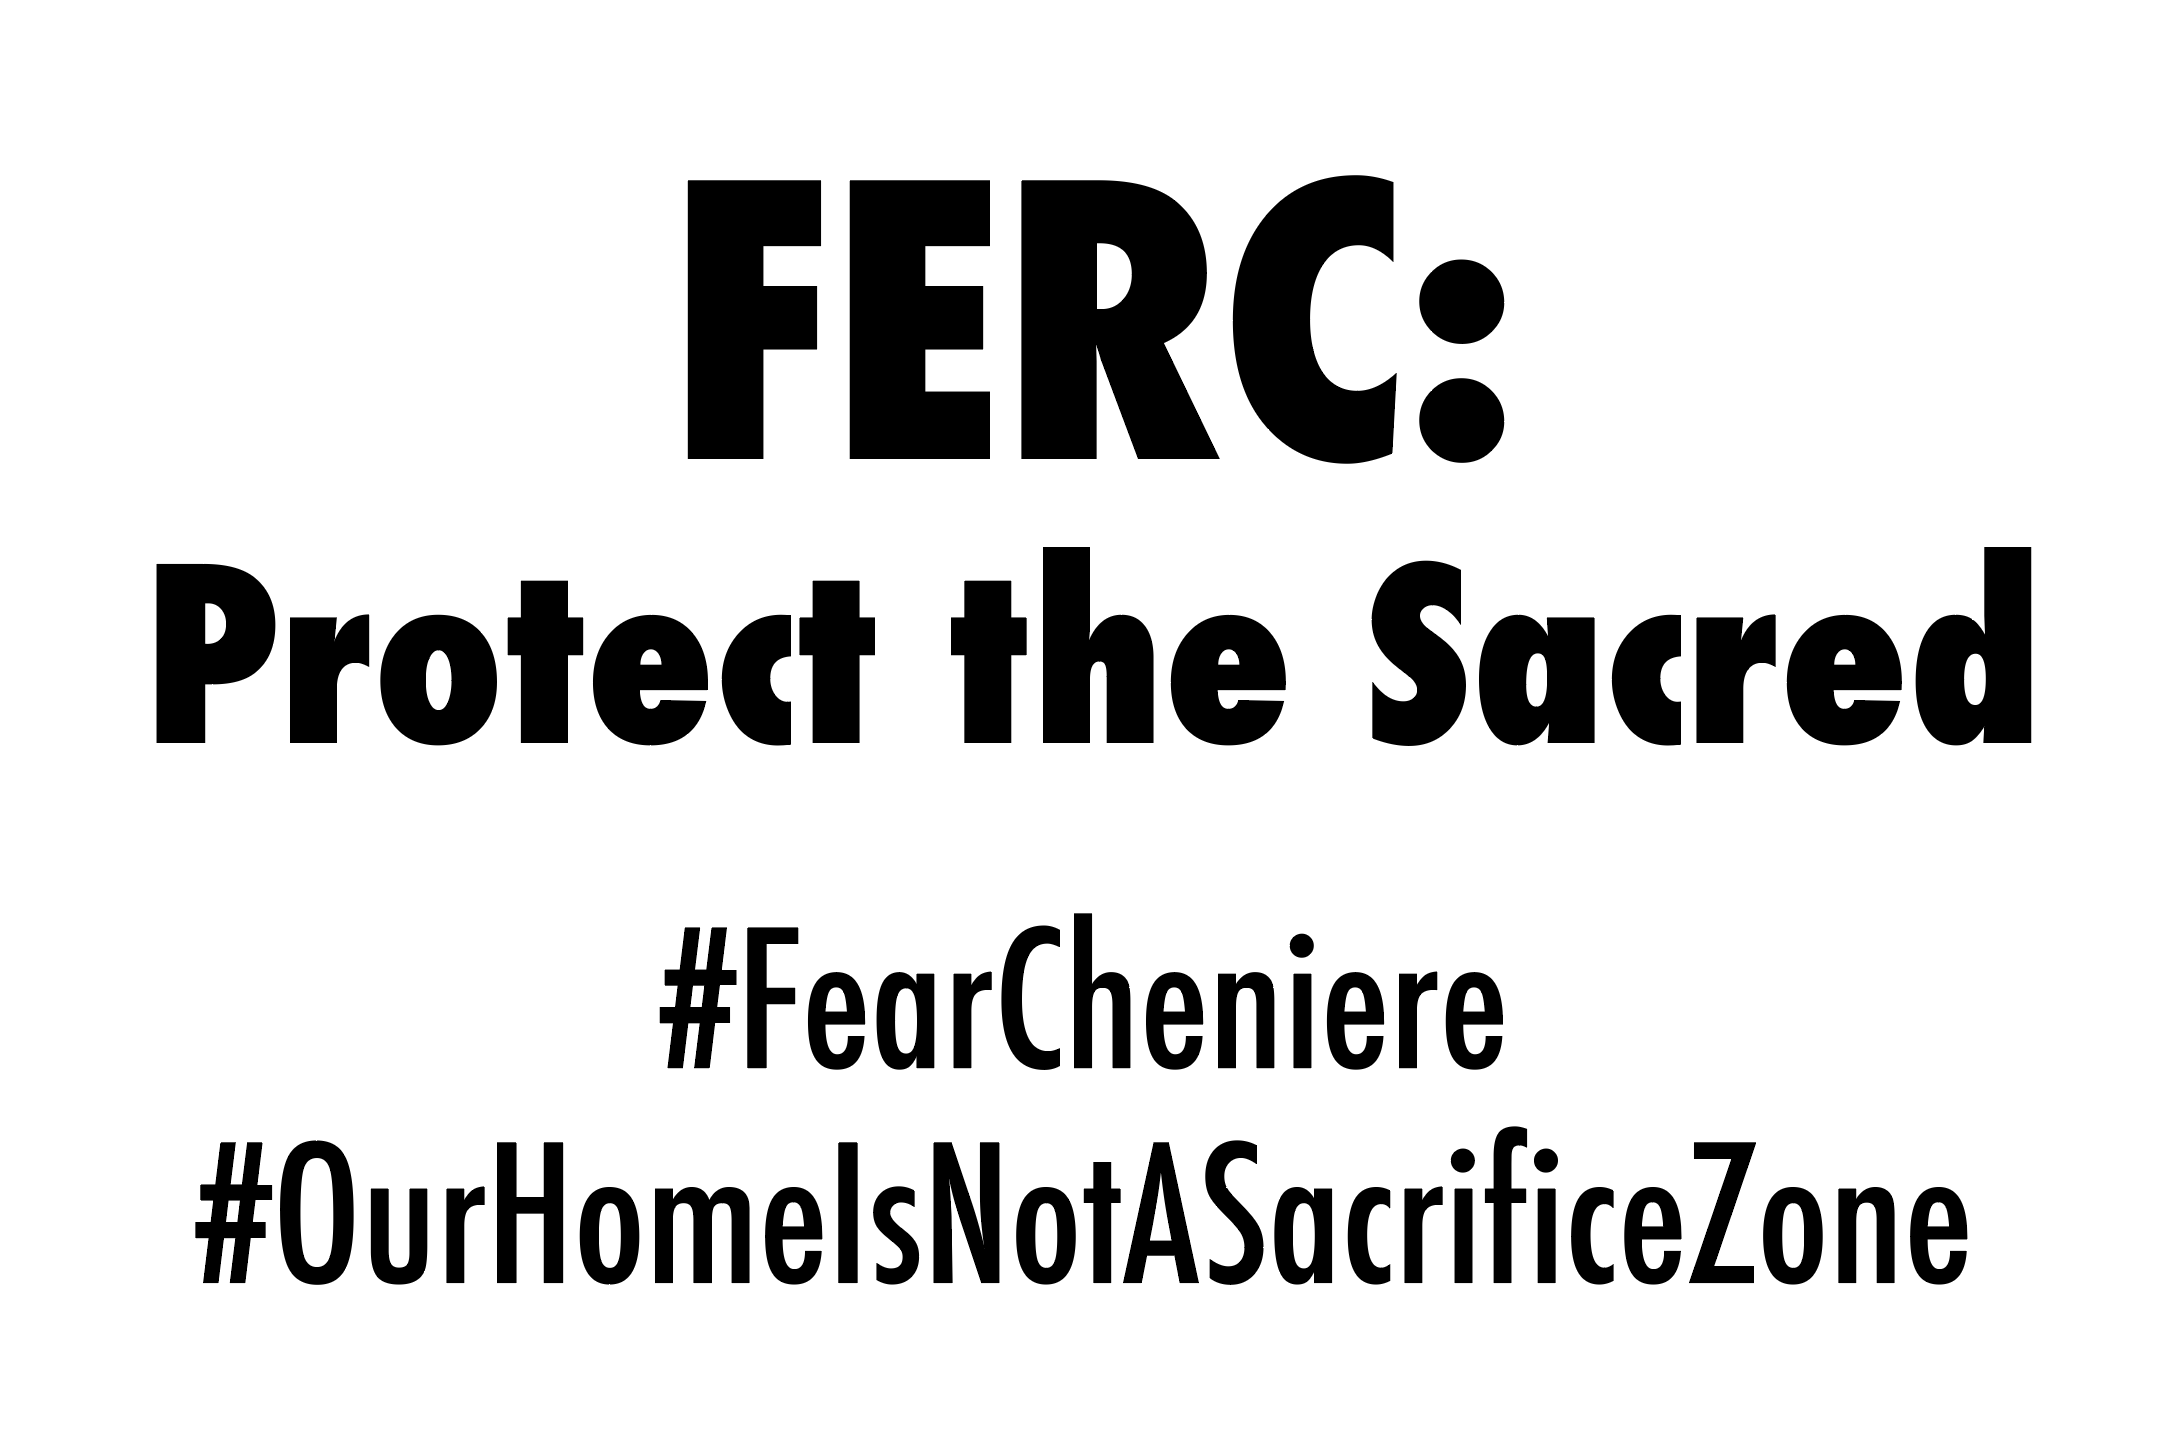 Black and white bold lettering that says "FERC: Protect the Sacred #FearCheniere #Ourhomeisnotasacrificezone